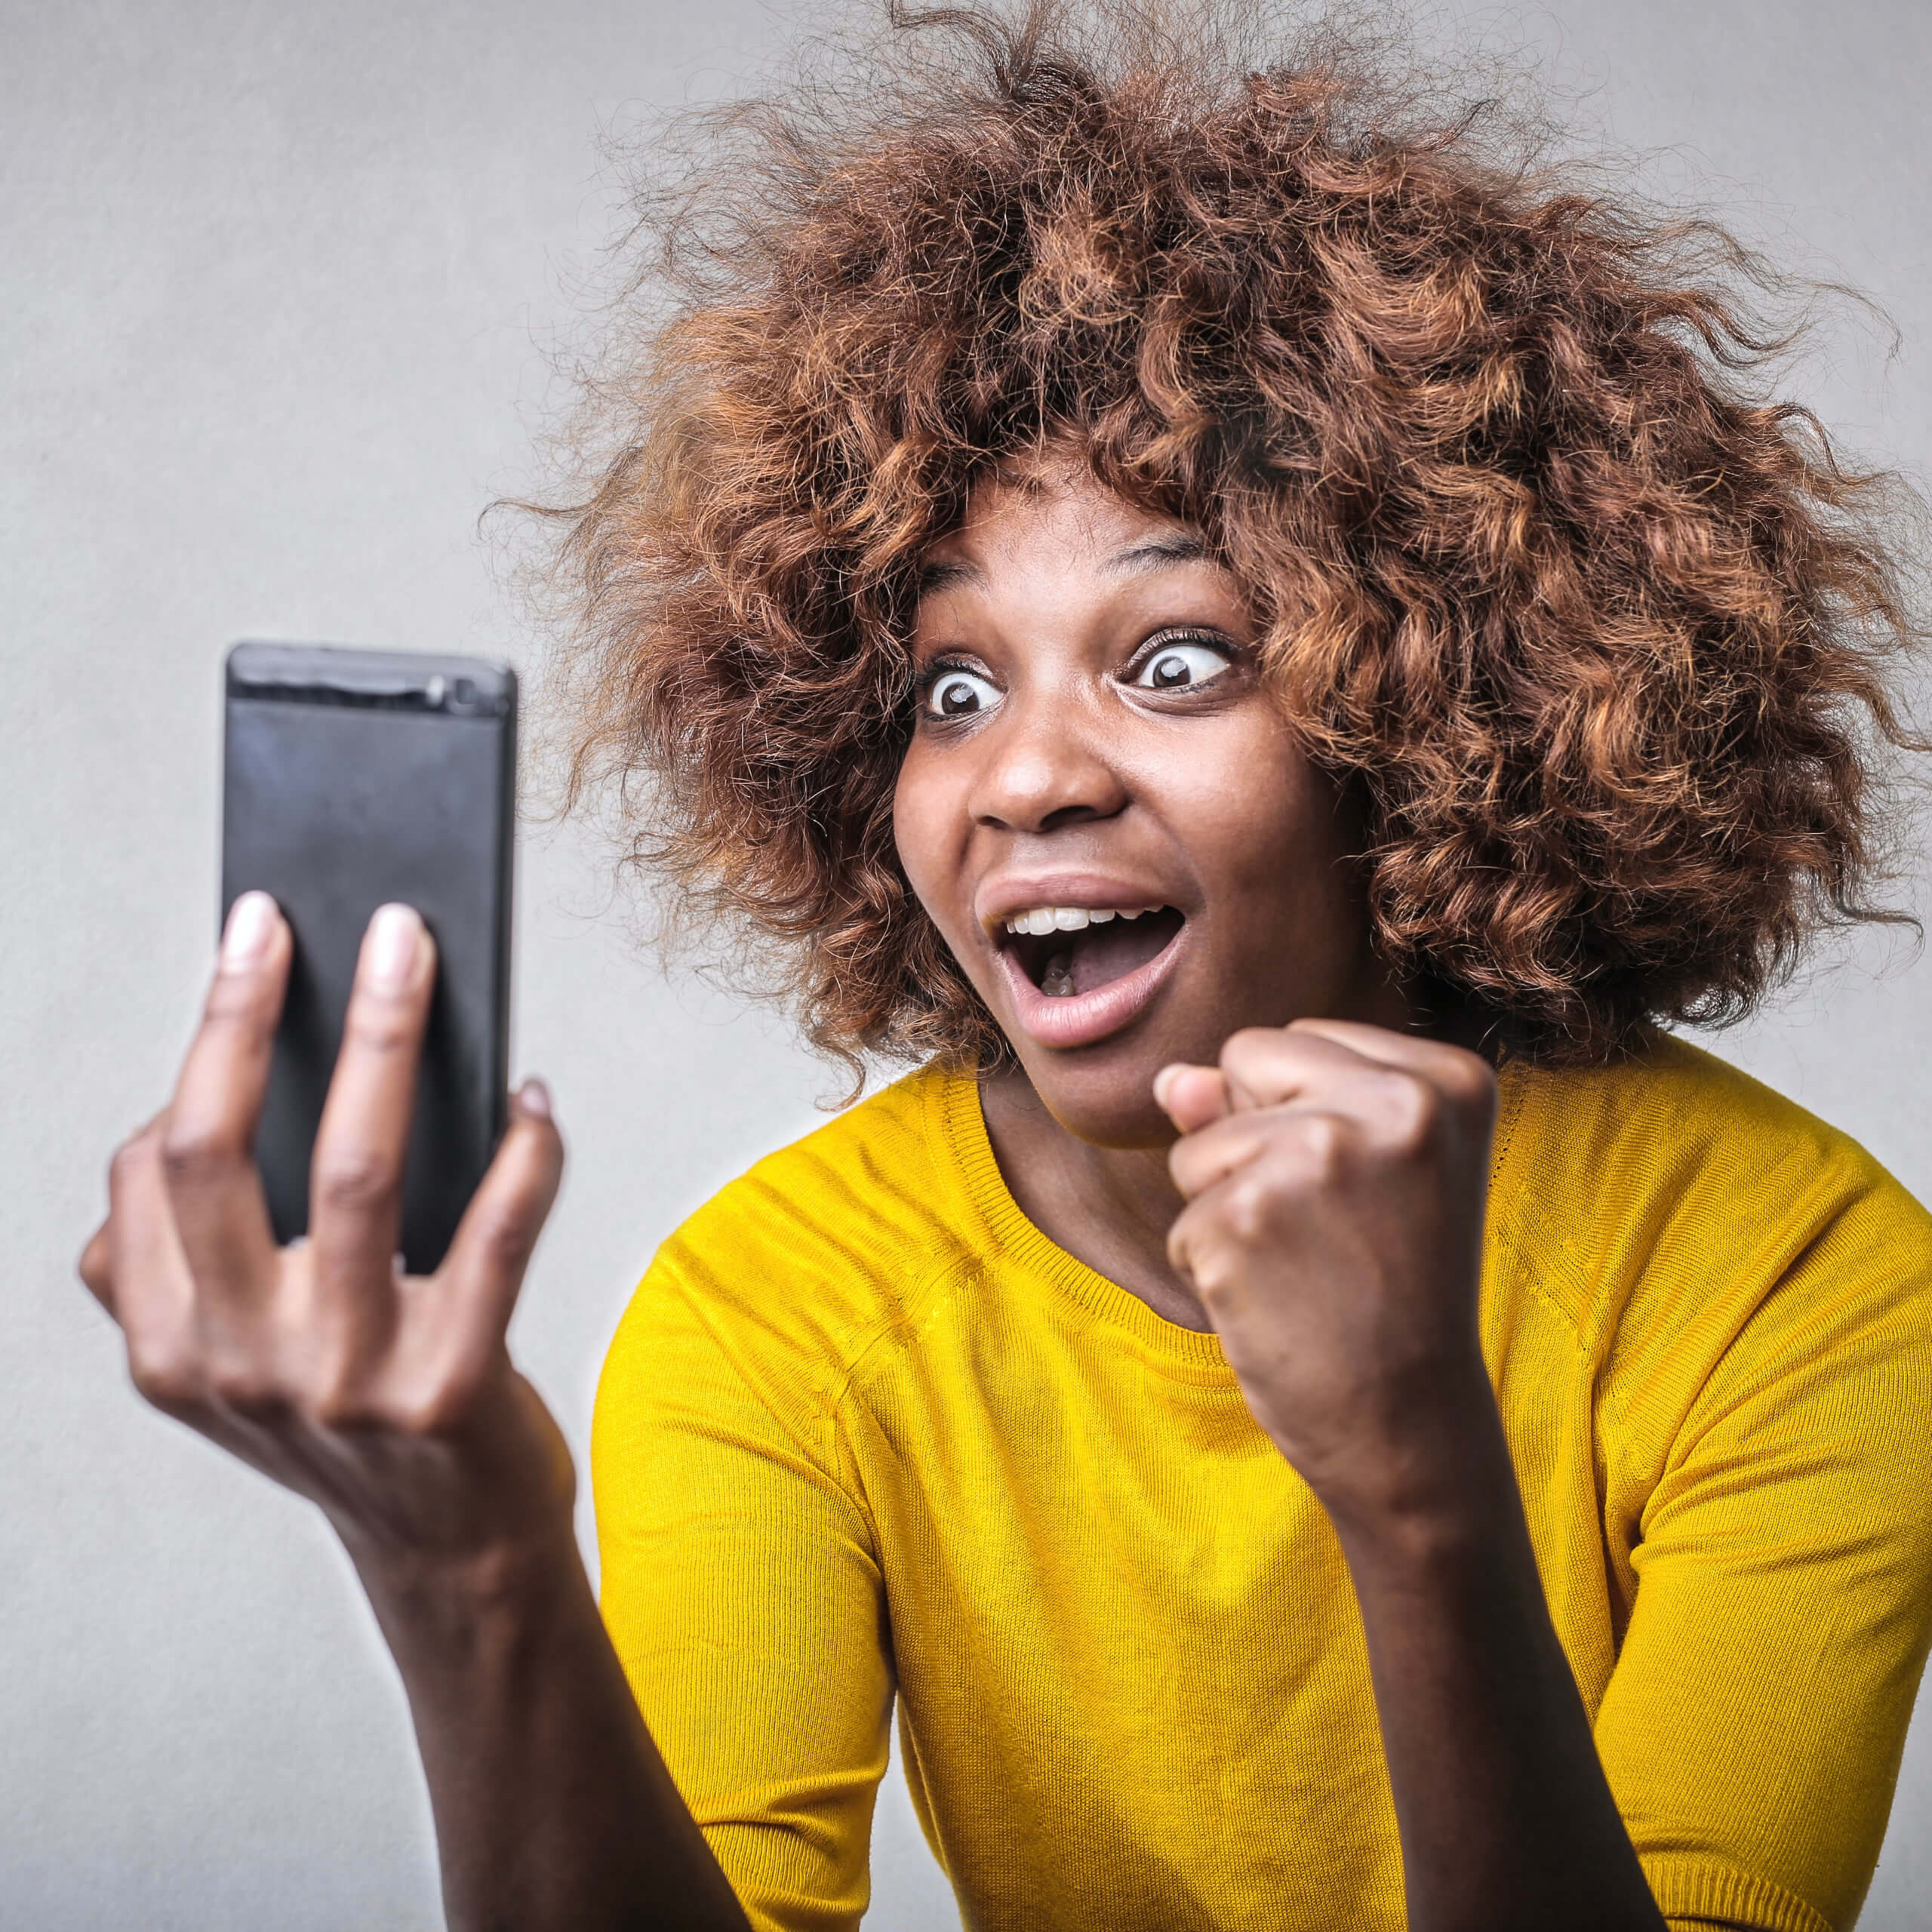 woman looking at her phone with a very surprised and excited look on her face